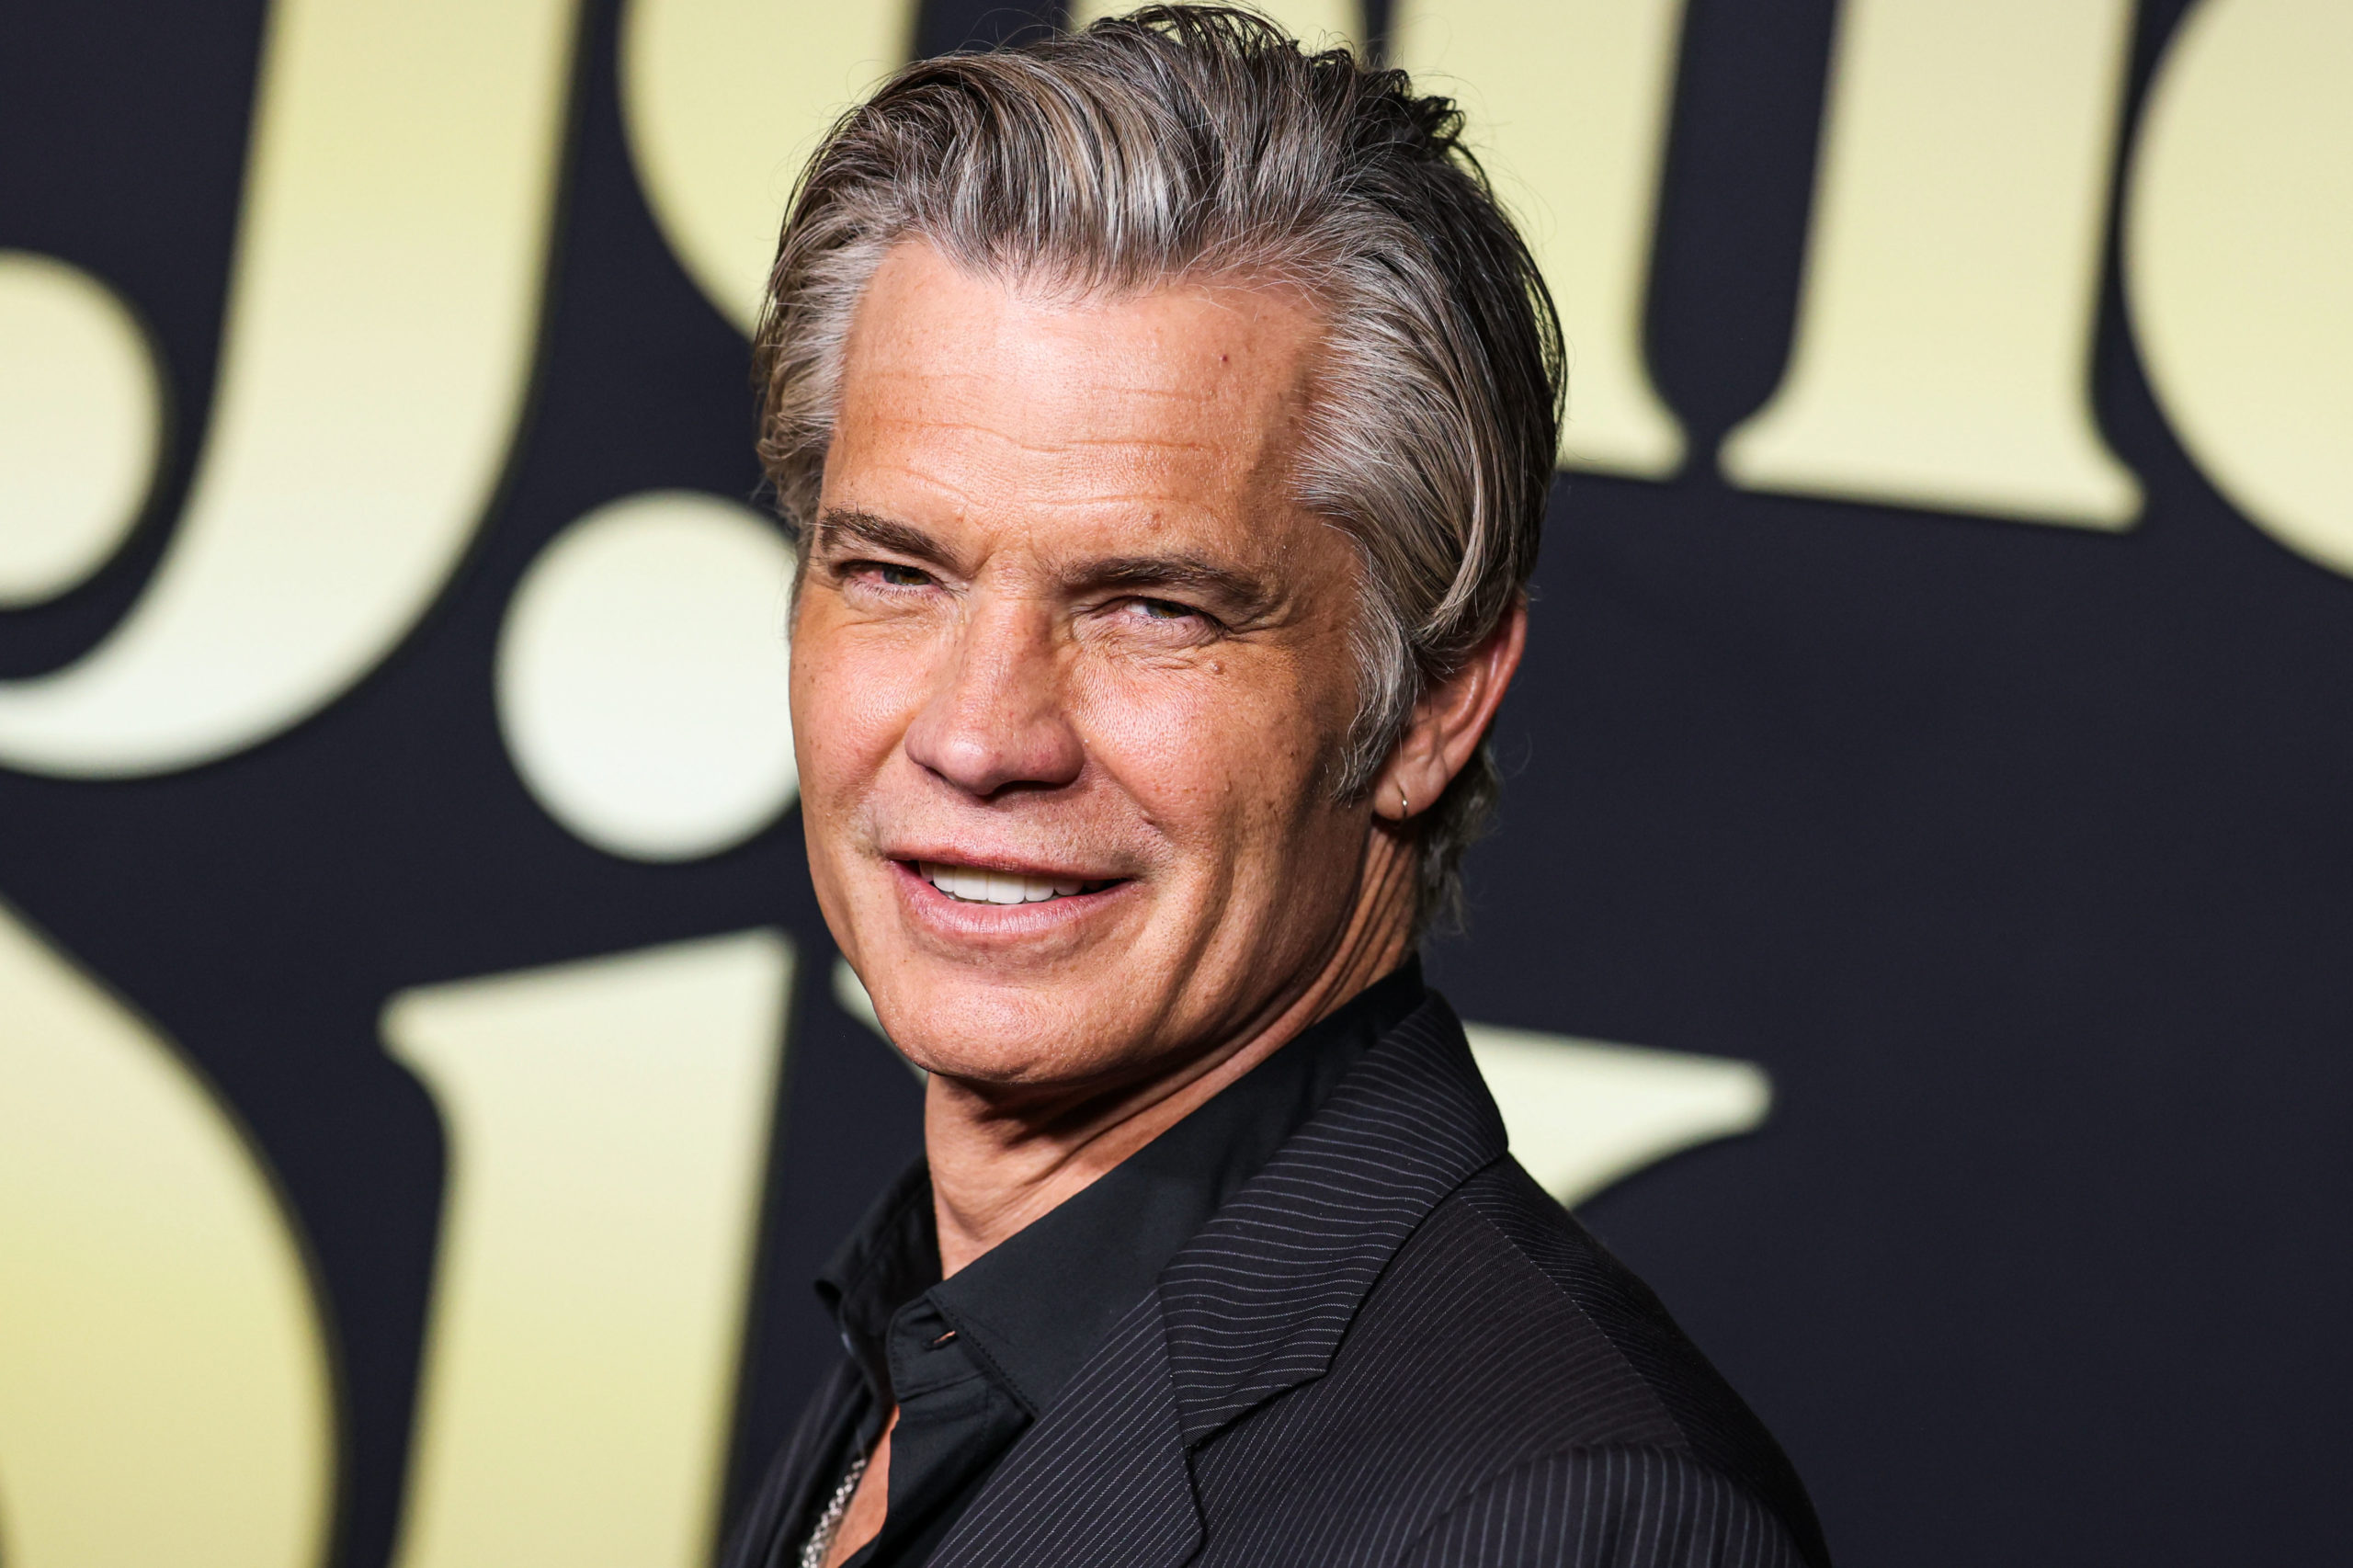 #Alien: Timothy Olyphant (Justified: City Primeval) Joins Sci-Fi Prequel Series on FX